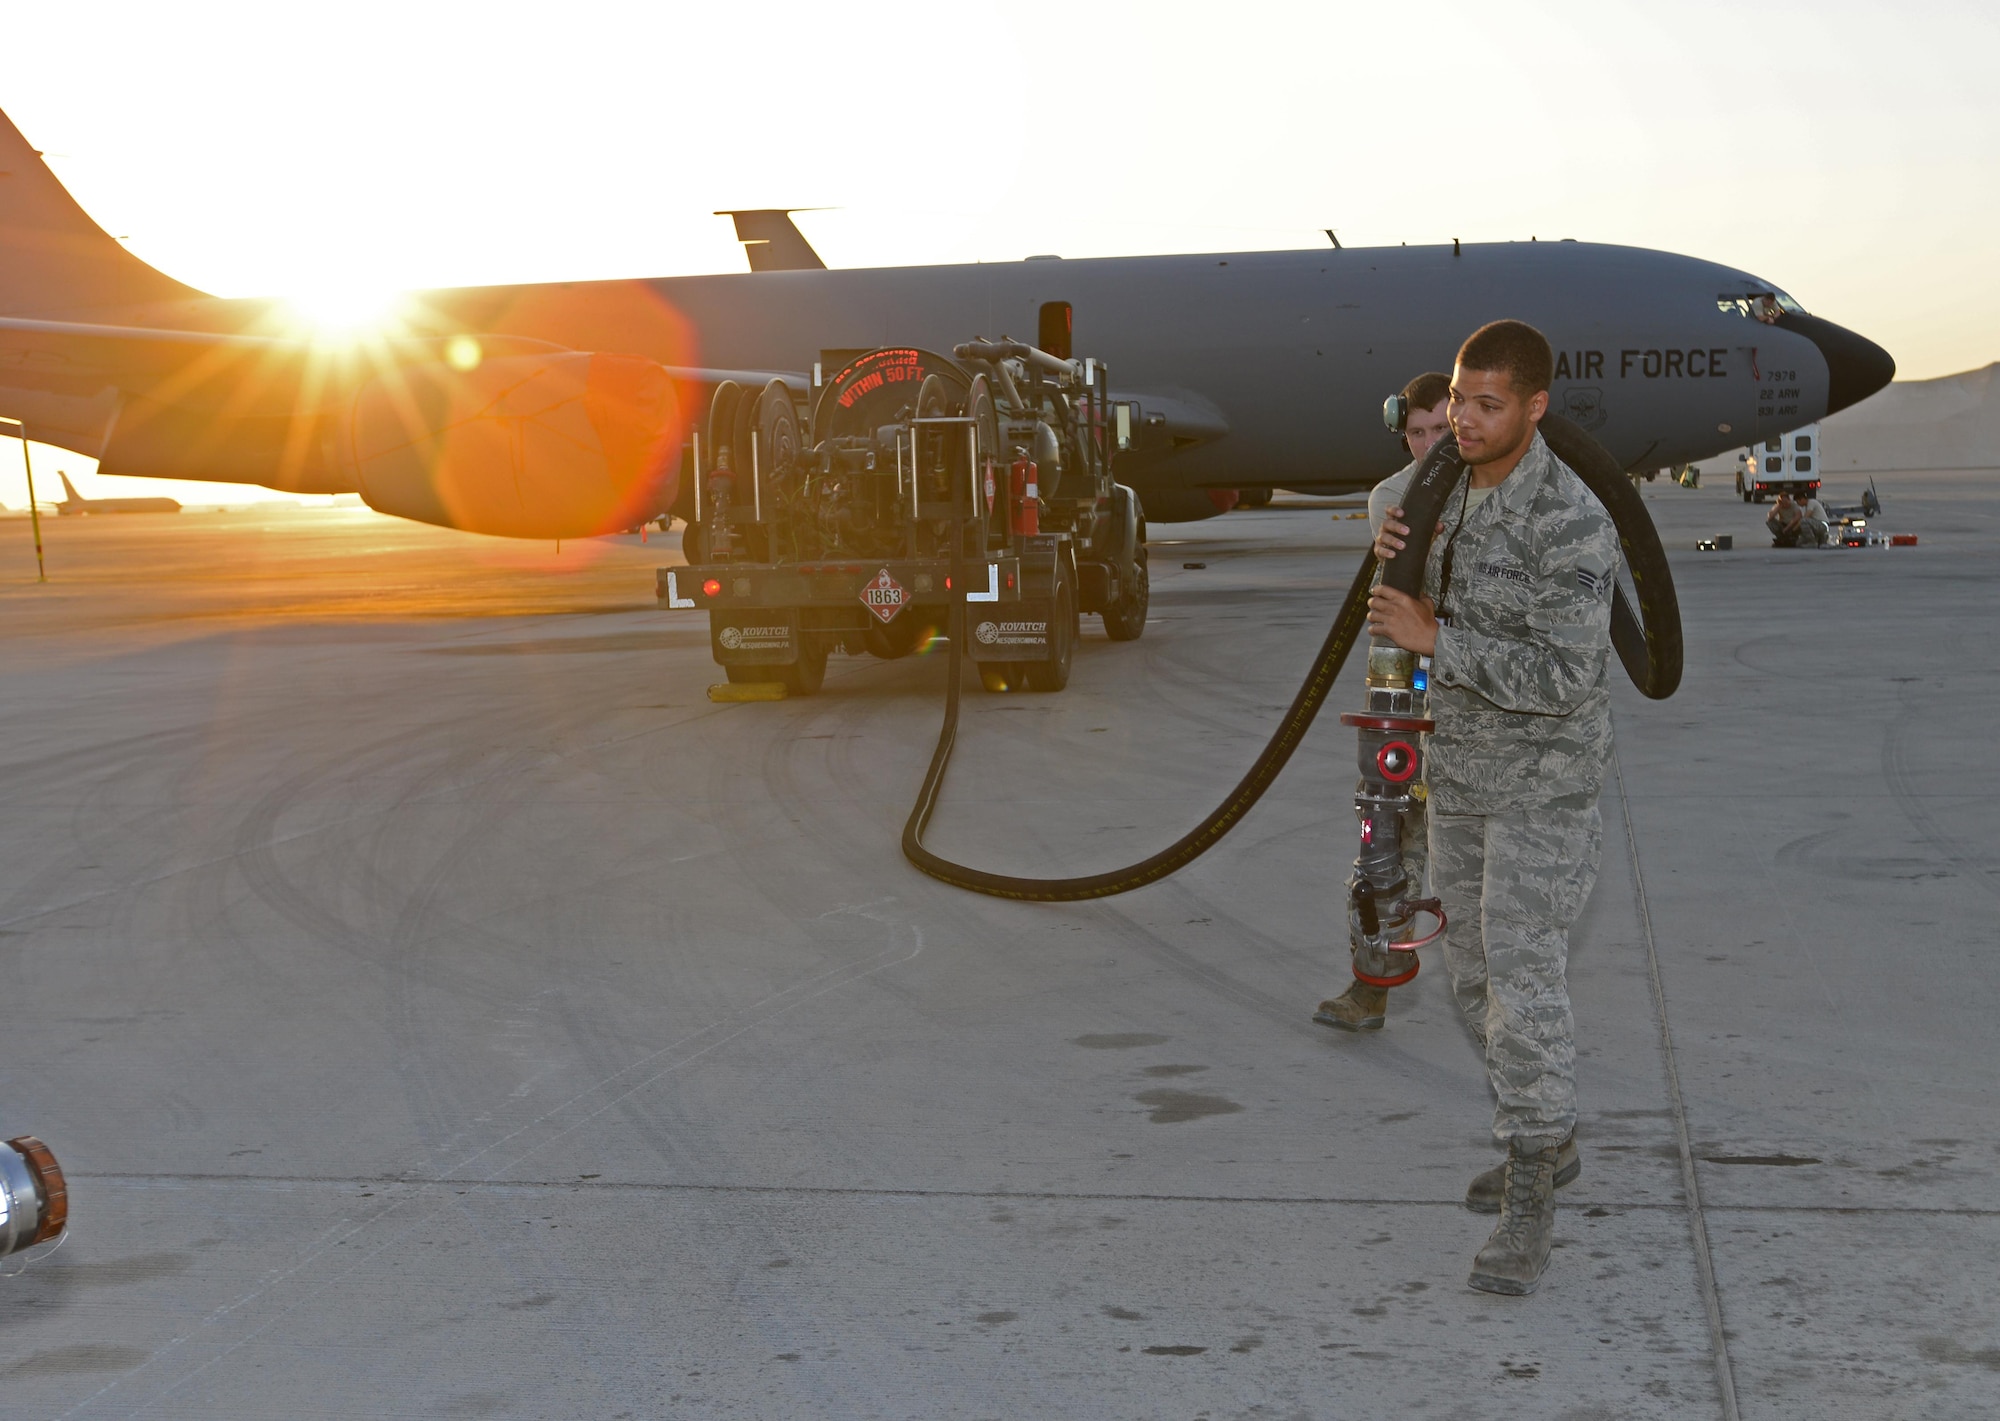 Airman 1st Class Jovonte Atkins, 379th Expeditionary Logistics Readiness Squadron fuels specialist extend a fuels hose from a R-12 refueler to refuel an aircraft at Al Udeid Air Base, Qatar, Feb. 5, 2015. Since 2001, the 379th ELRS fuels flight has delivered more than three billion gallons of aviation and ground fuel in support of operations Enduring Freedom and Iraqi Freedom. (U.S. Air Force photo by Master Sgt. Kerry Jackson)   